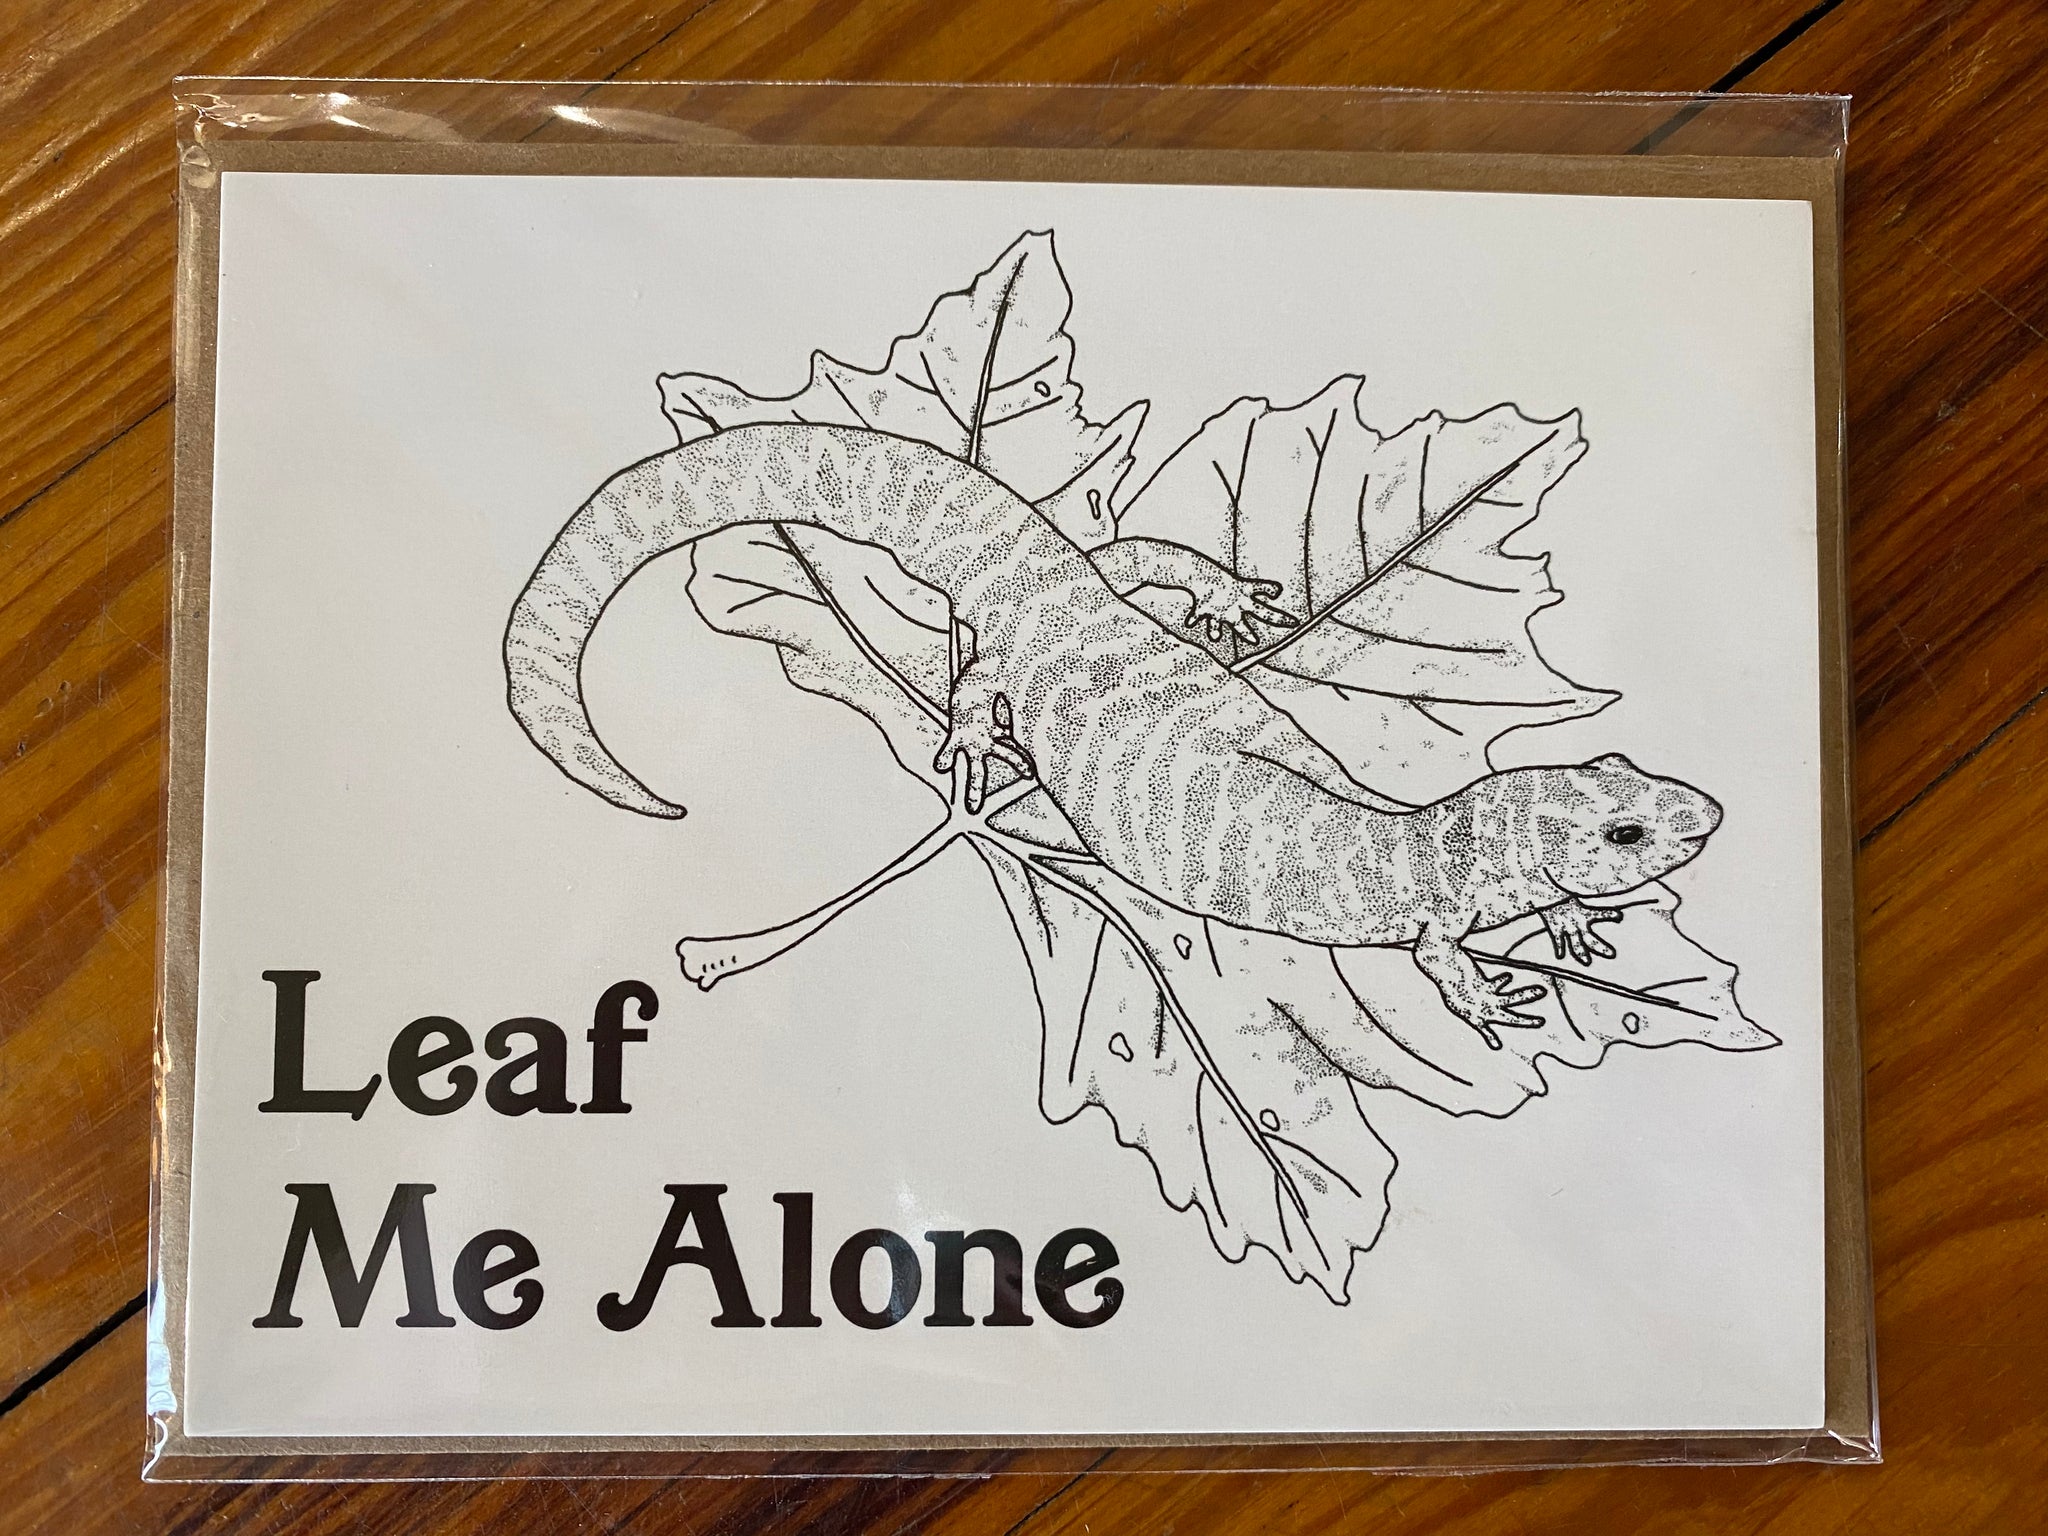 There is a horizontal greeting card. The background is white and there is a design of a salamander on a leaf on it. There are also the words "Leaf Me Alone" in serif font. This is a Notecard by Birds & Bees sold at The Hare & The Hart.